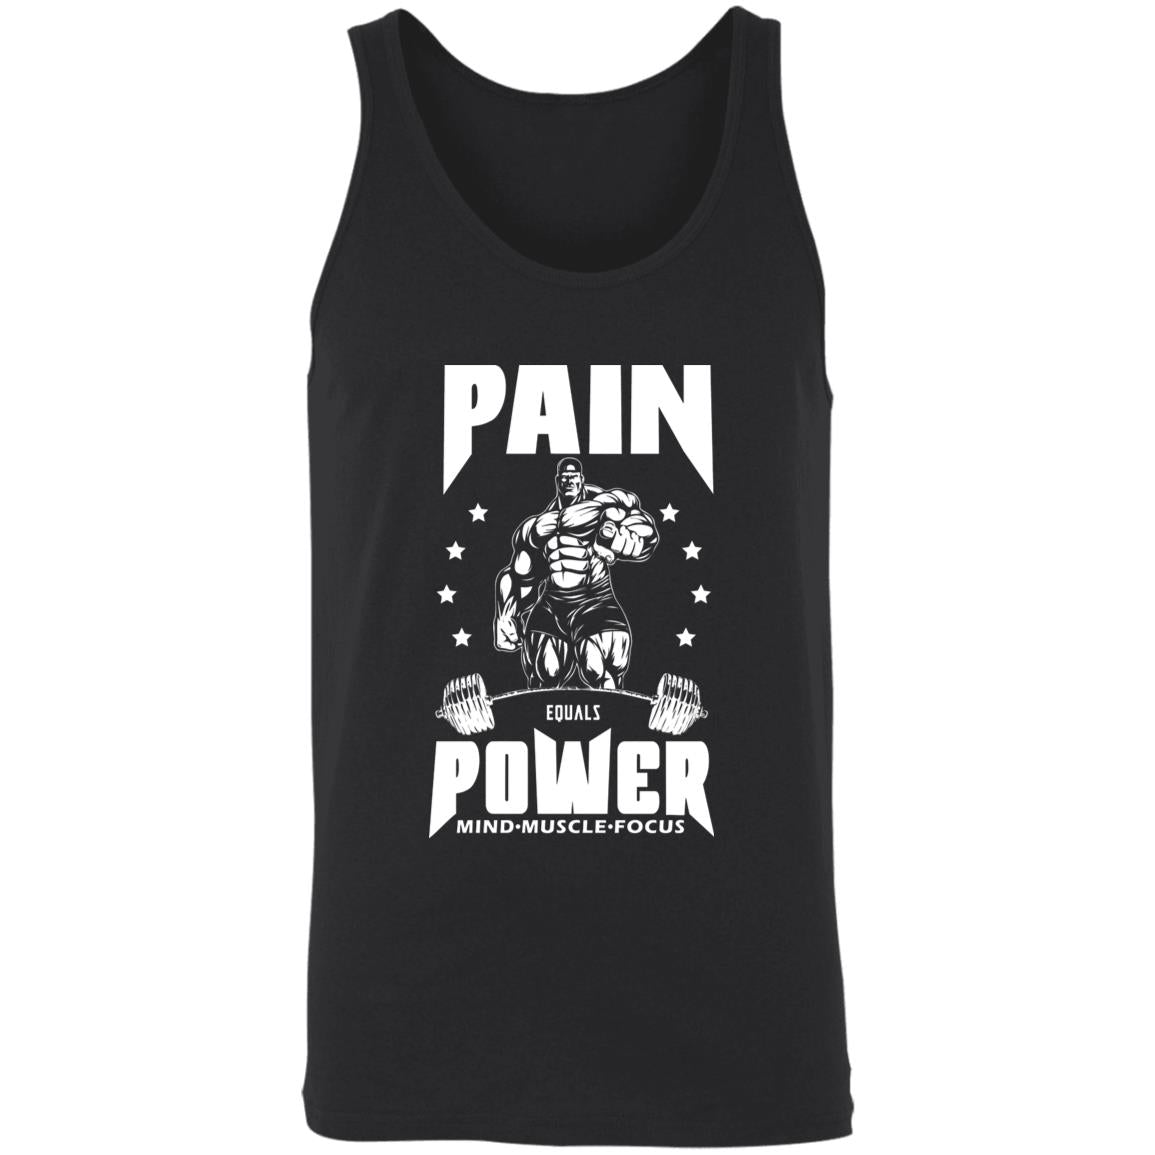 Pain Equals Power Sleeveless Gym Wear